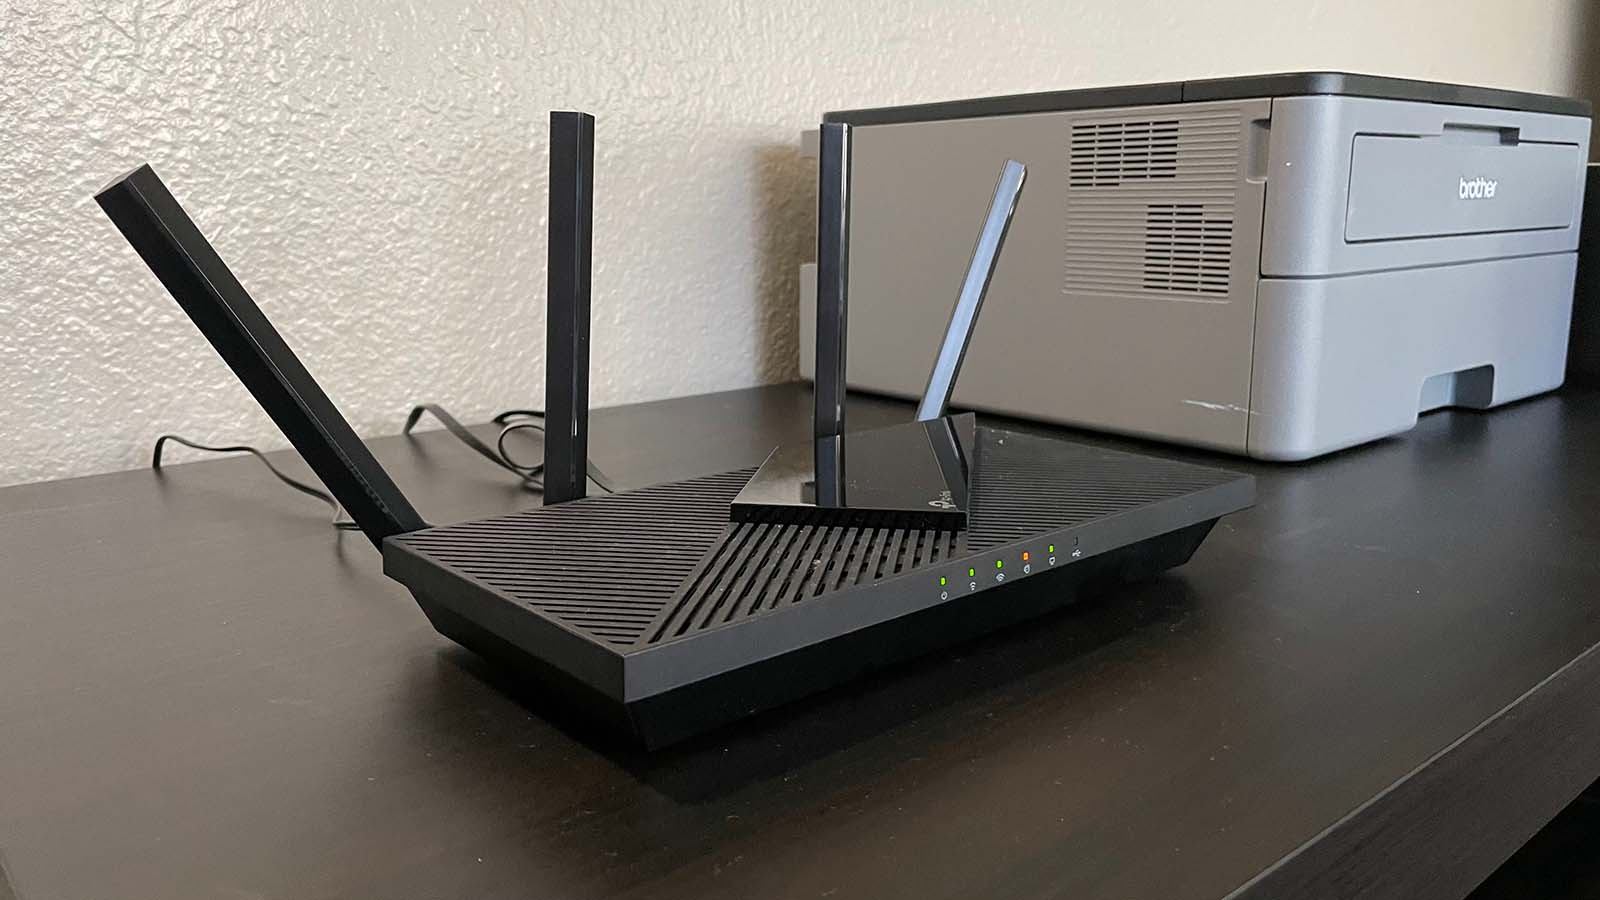 Recommended Routers in 2023